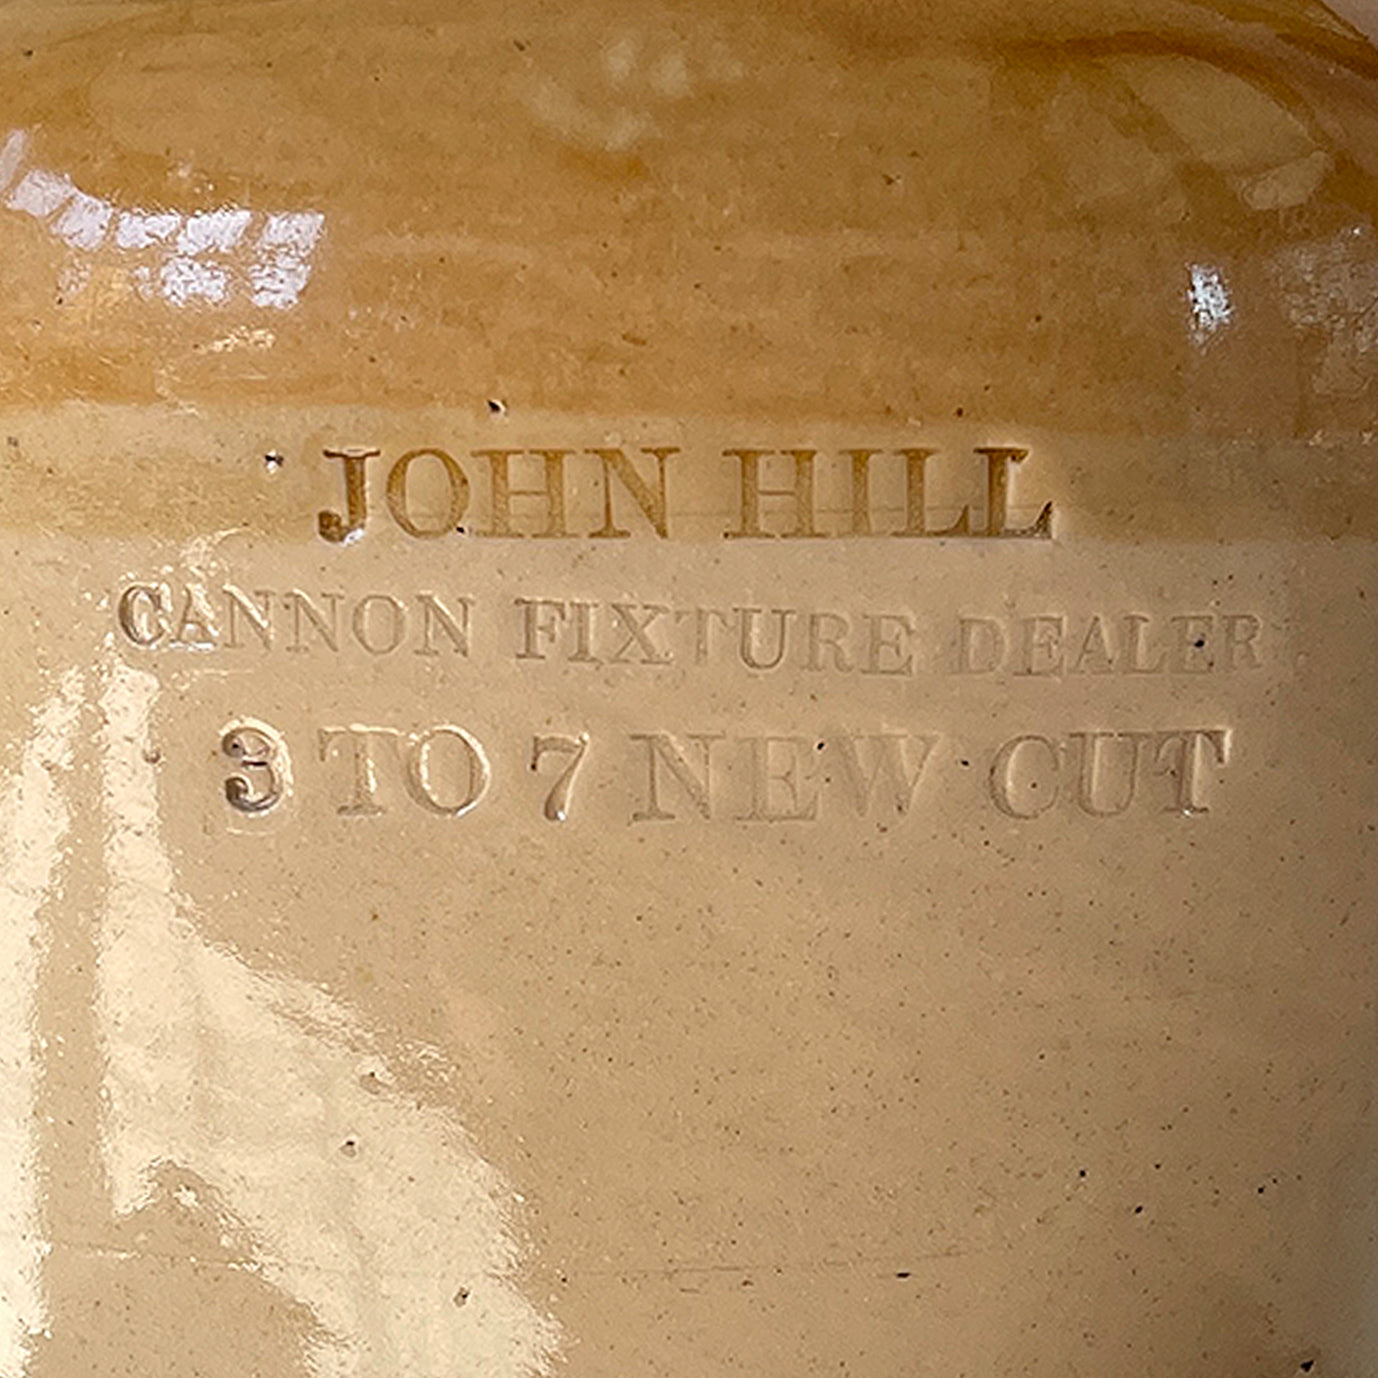 An Antique John Hill Earthenware Tobacco Jar with its original tin lid. Stamped 'JOHN HILL, CANNON FIXTURE DEALER, 3 to 7 NEW CUT' with remnants of its original tobacco label - SHOP NOW - www.itovintage.co.uk